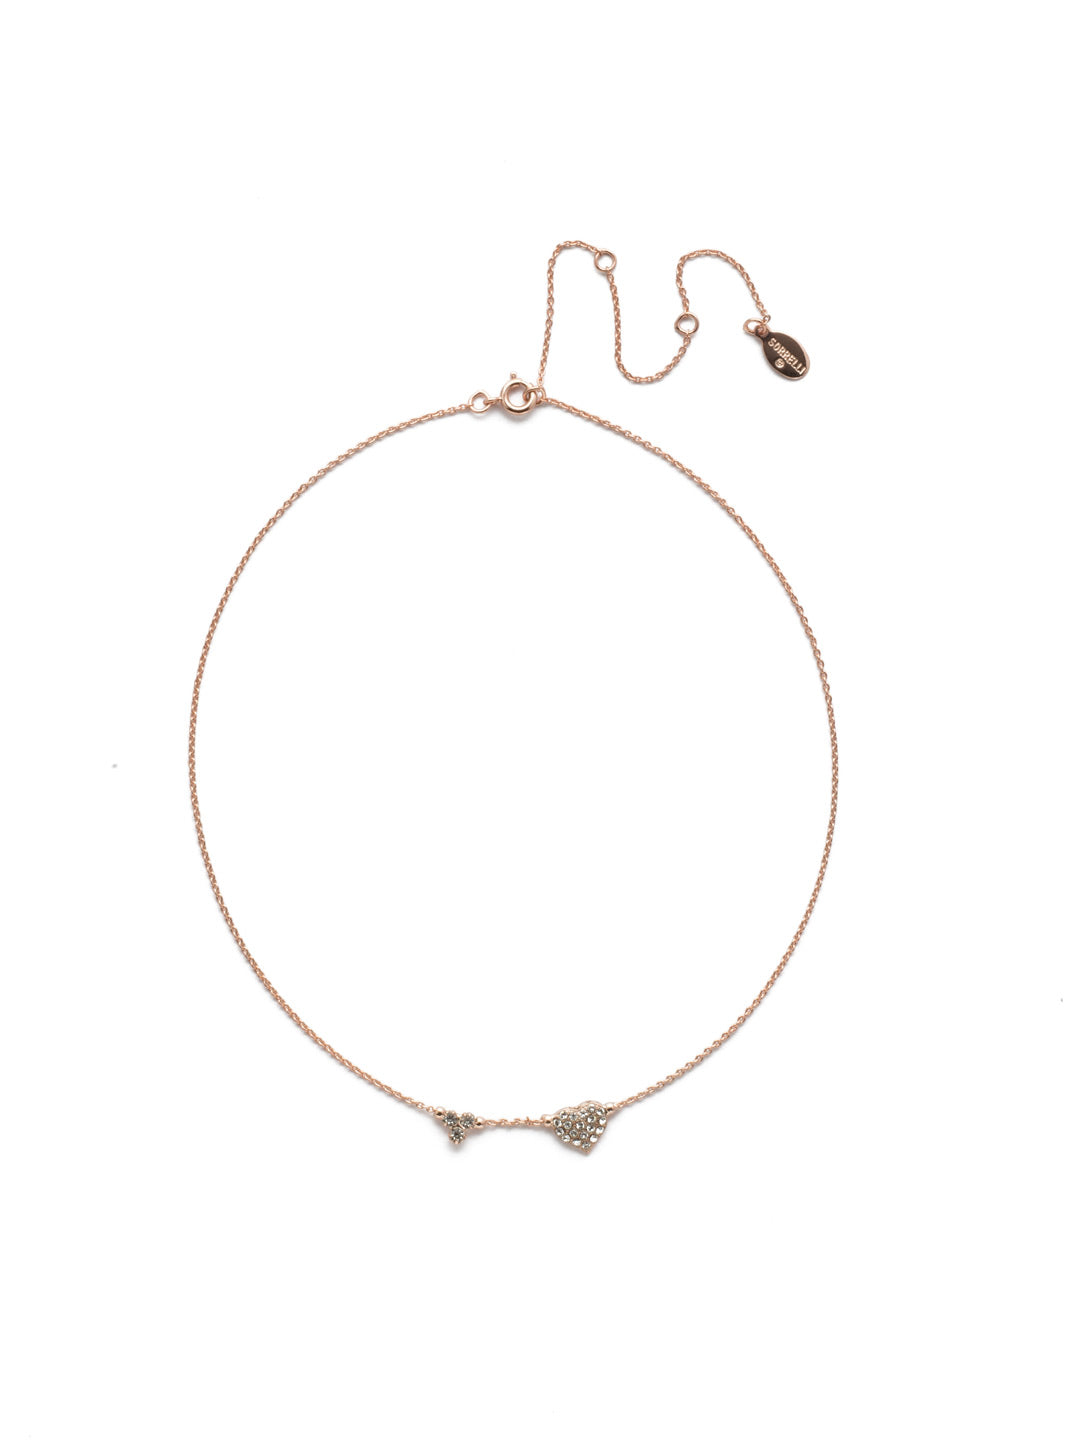 Vevina Choker Necklace - NEM2RGCRY - <p>A delicate heart accented by sparkling gems gives off the perfect amount of shine, making this necklace essential for upping your outfit's ante. From Sorrelli's Crystal collection in our Rose Gold-tone finish.</p>